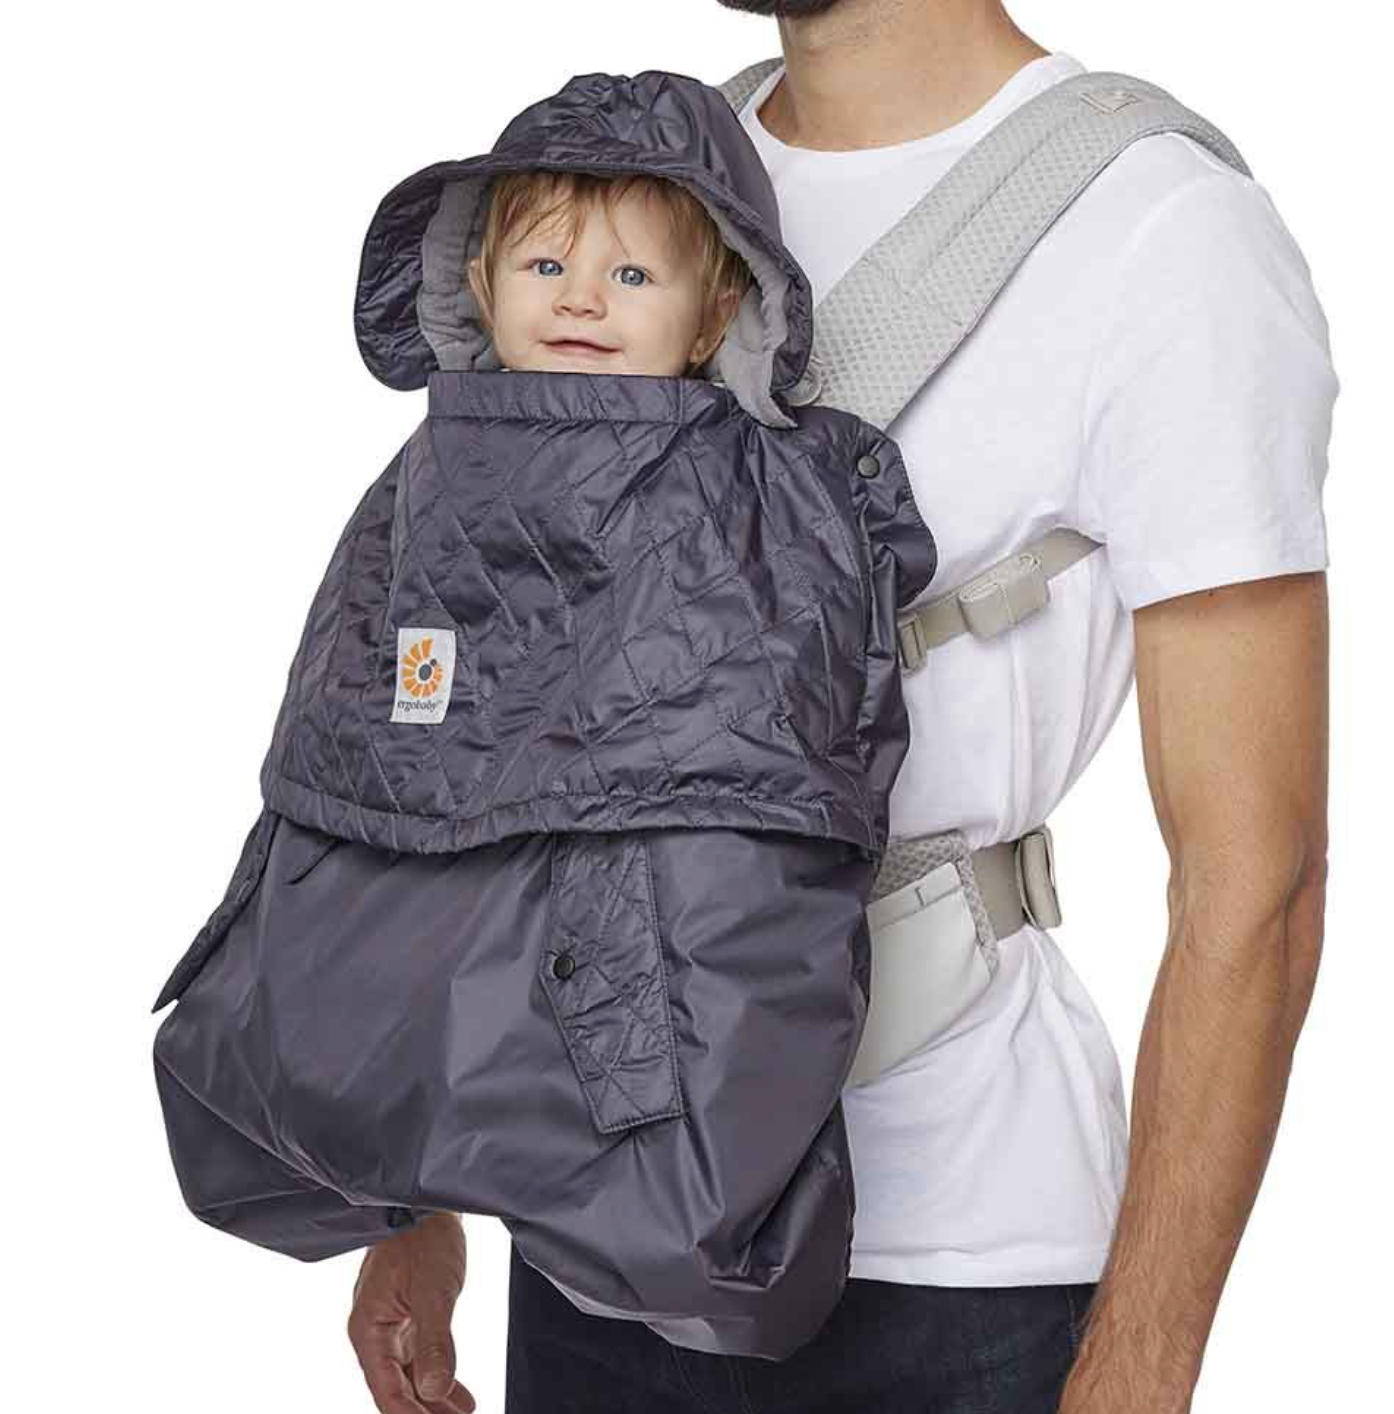 Ergobaby All Weather Cover | Charcoal | Baby Carrier Accessory | On Model